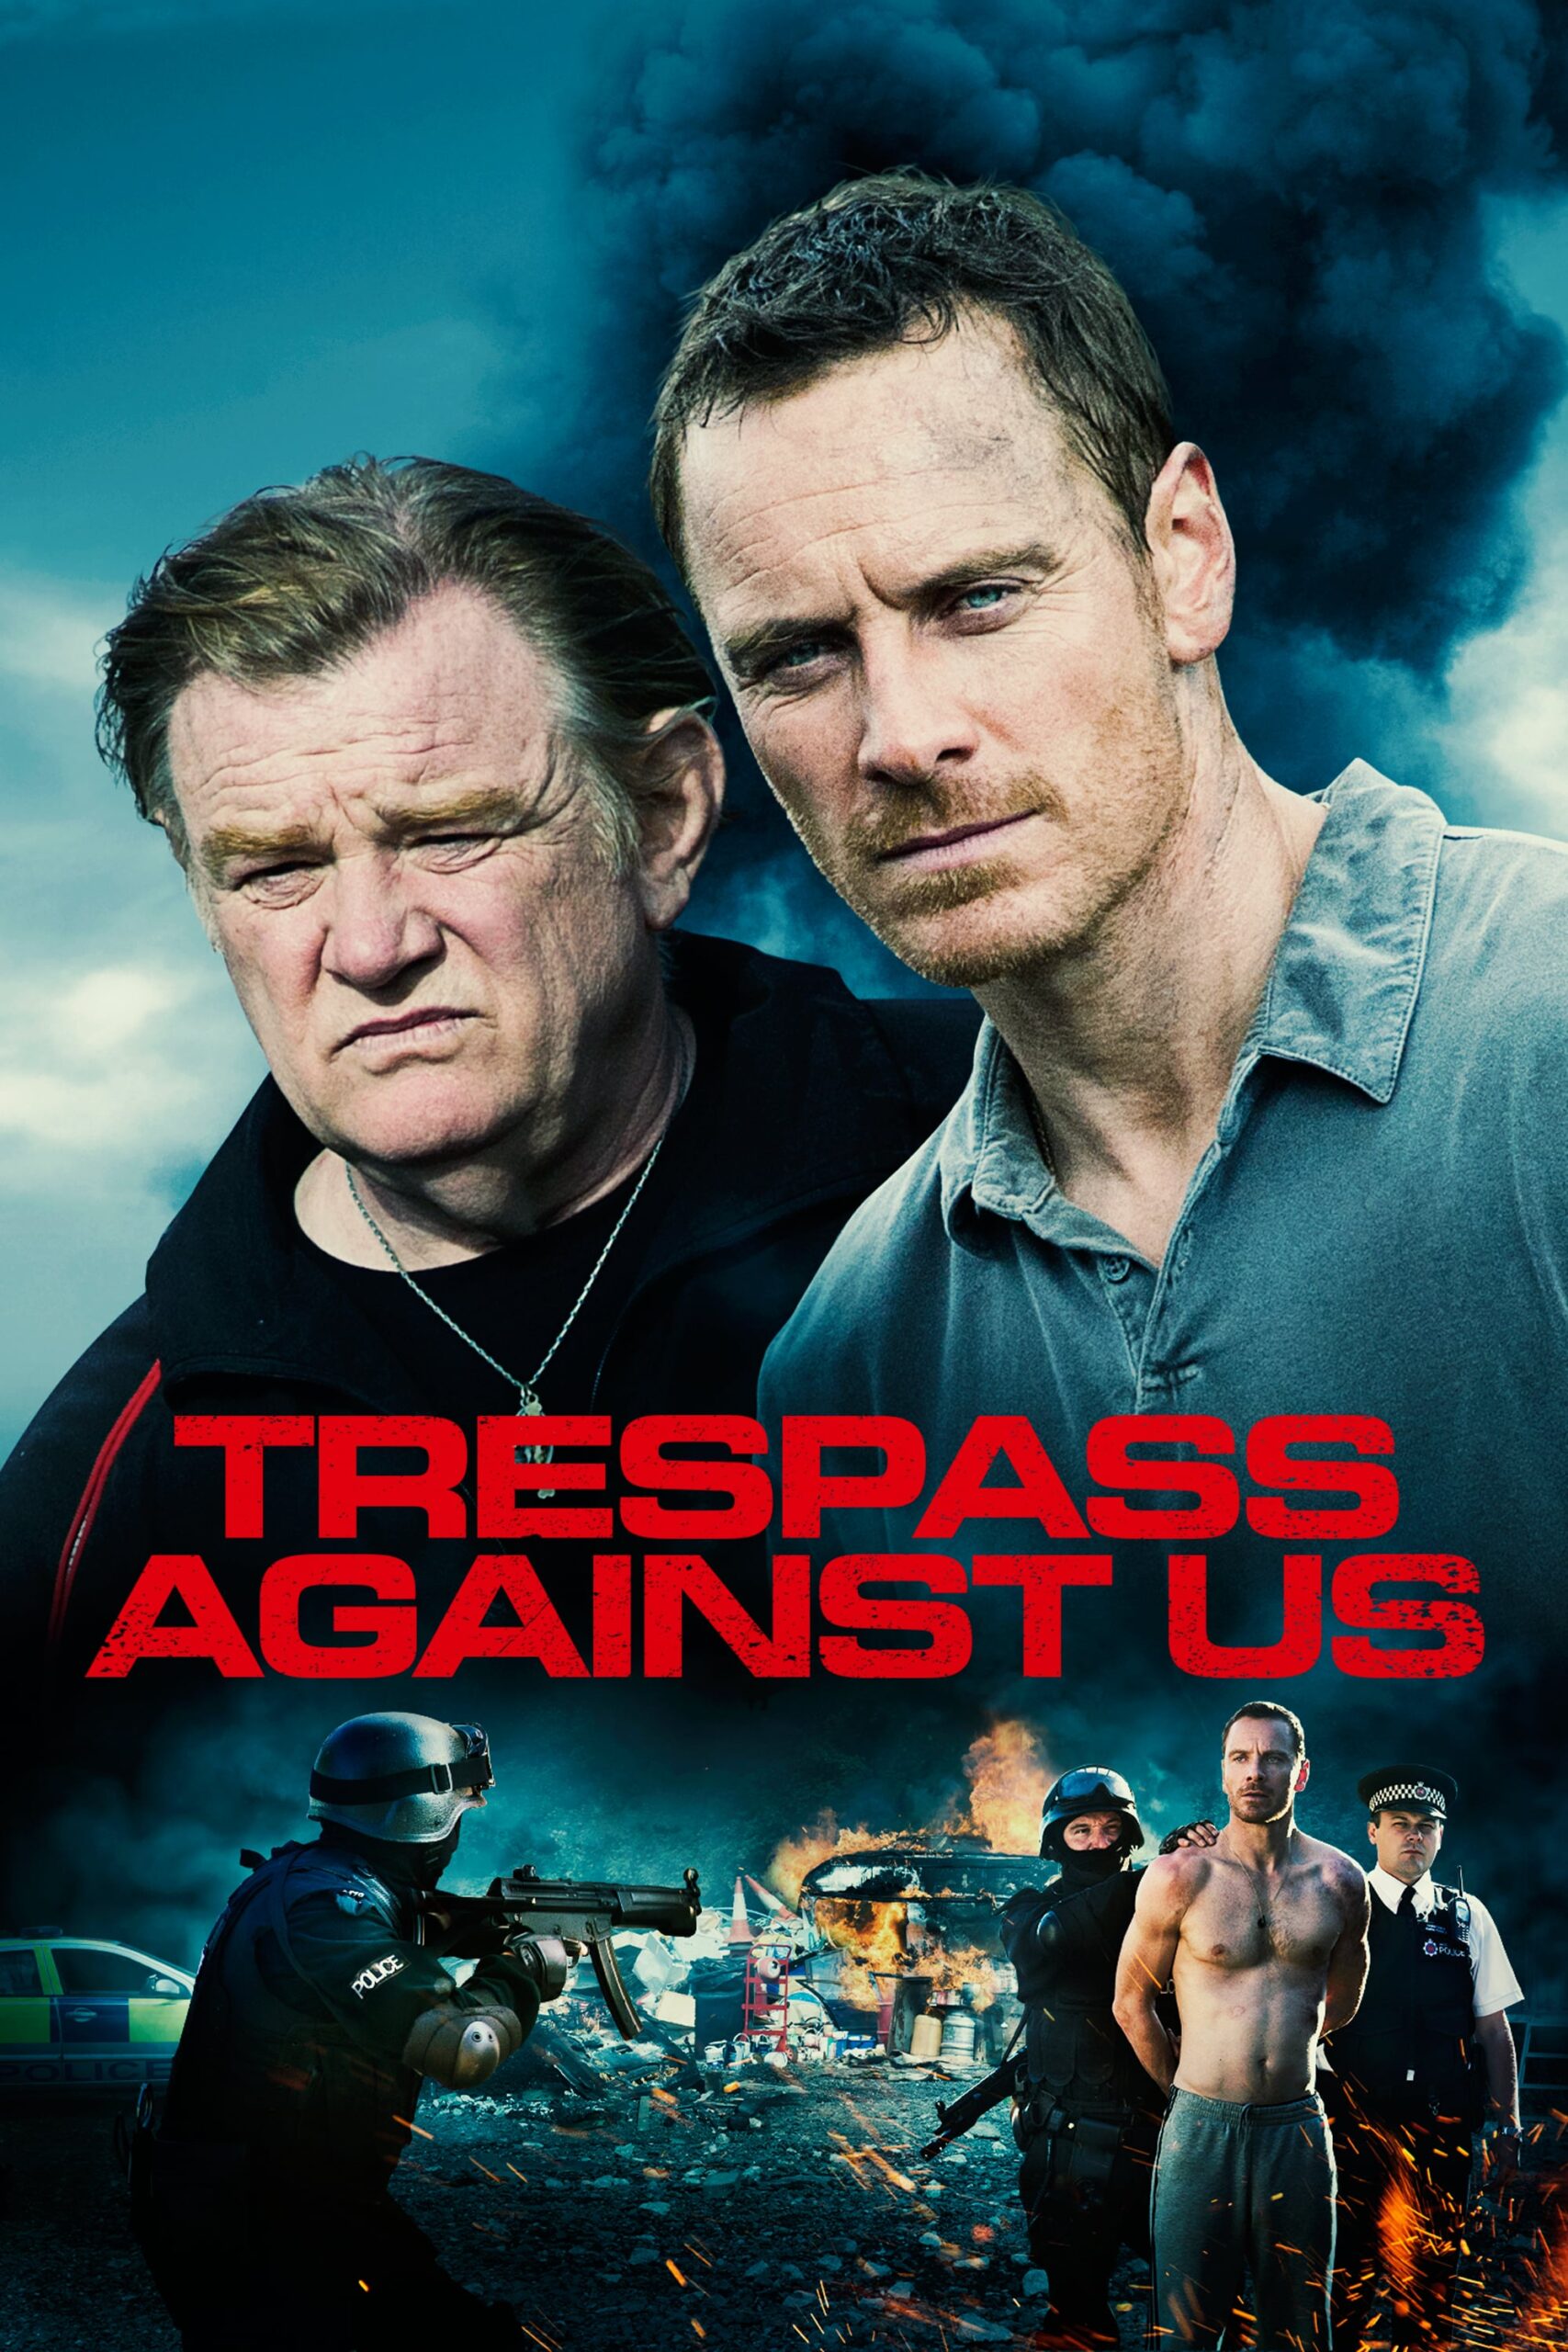 Poster for the movie "Trespass Against Us"